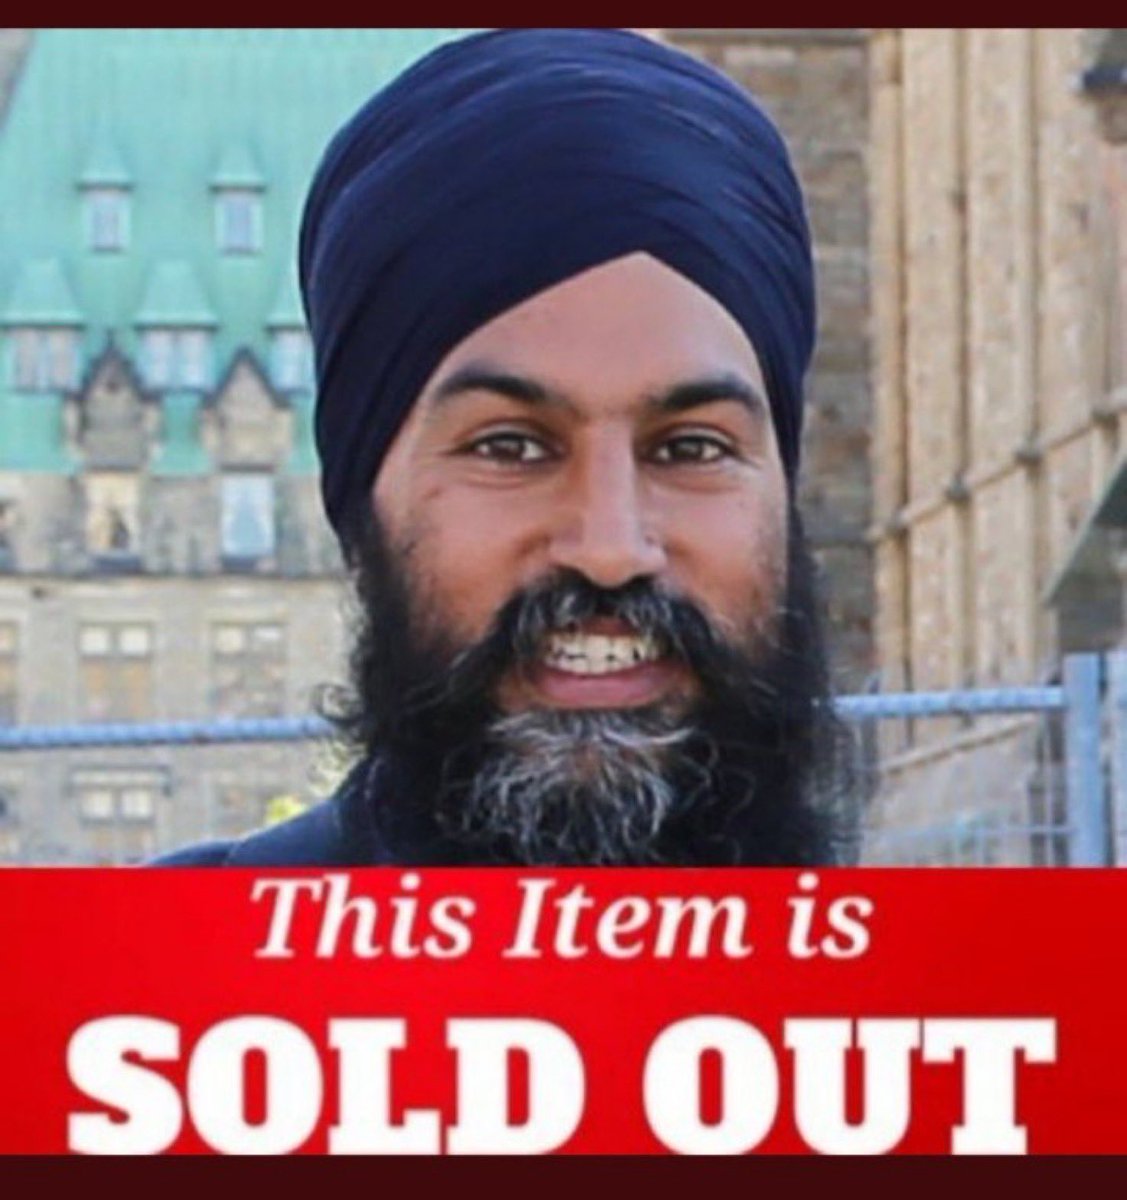 Sell out Singh is like a fish out of water Flip Flop! He is nothing but Trudeau A$$ Kisser! Chinese Interference into our Canadian Elections is extremely serious! One would hope #SellOutSingh would at least back up having a public enquire into Chinese Interference!